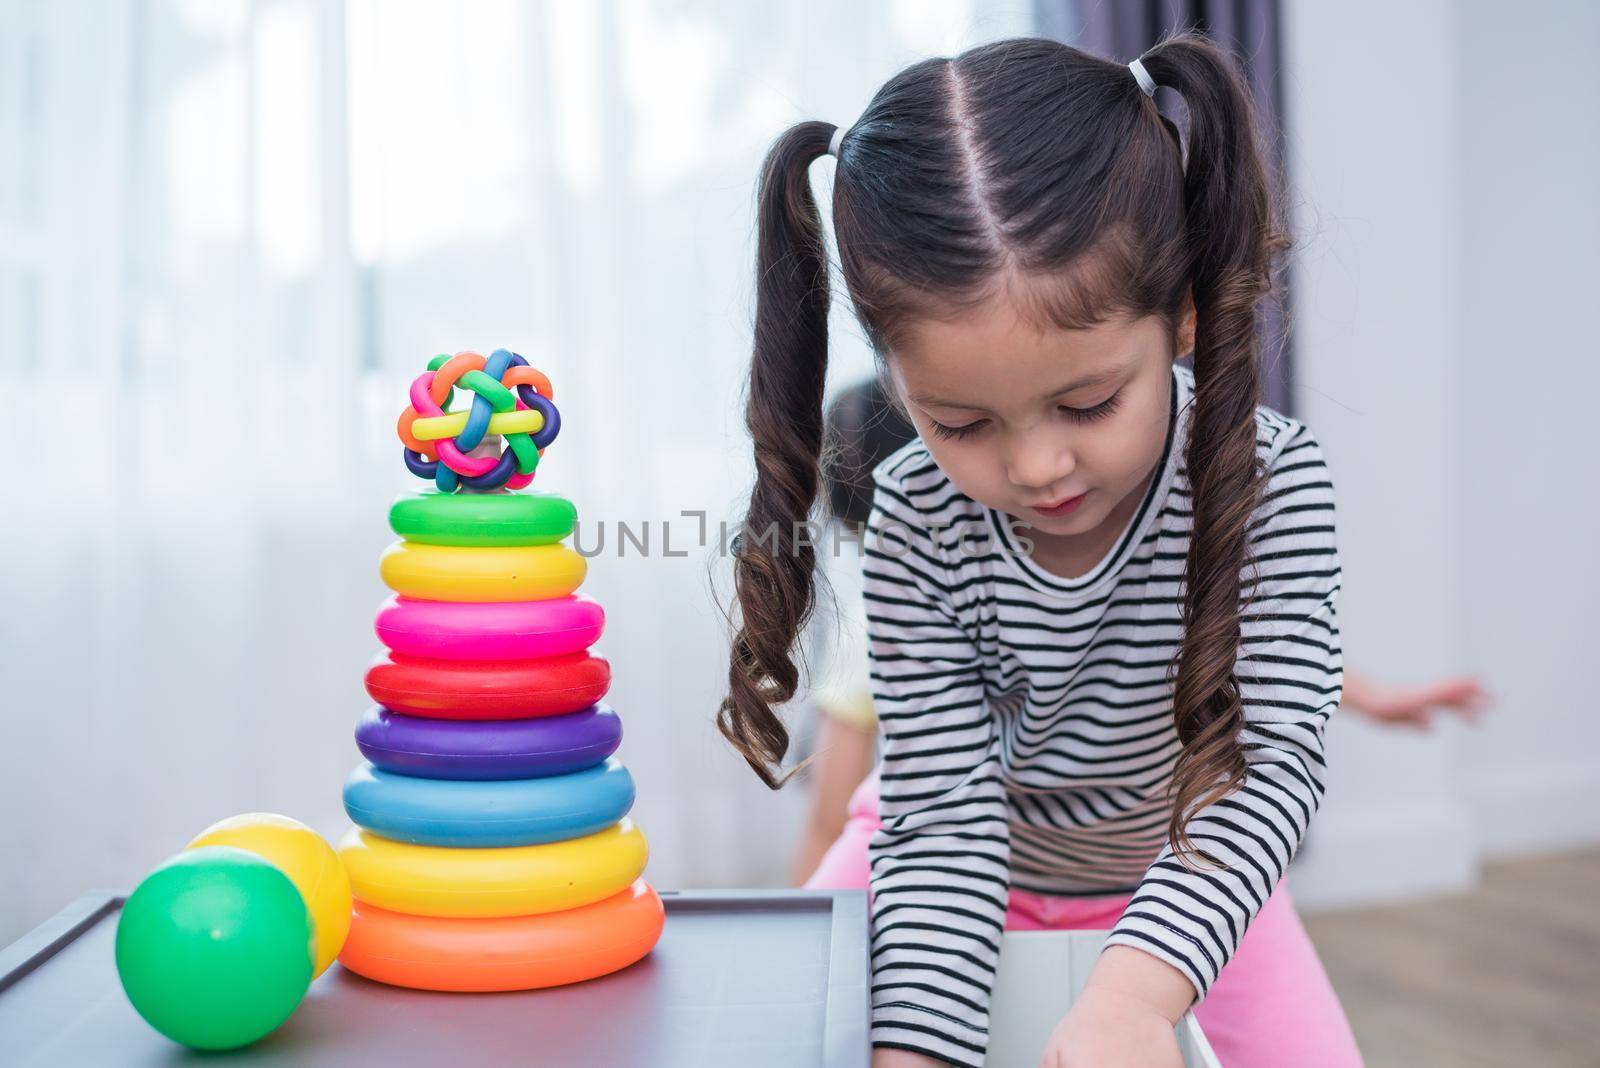 Little girls playing small toy hoops in home. Education and Happiness lifestyle concept. Funny learning and Children development theme. Smile faces